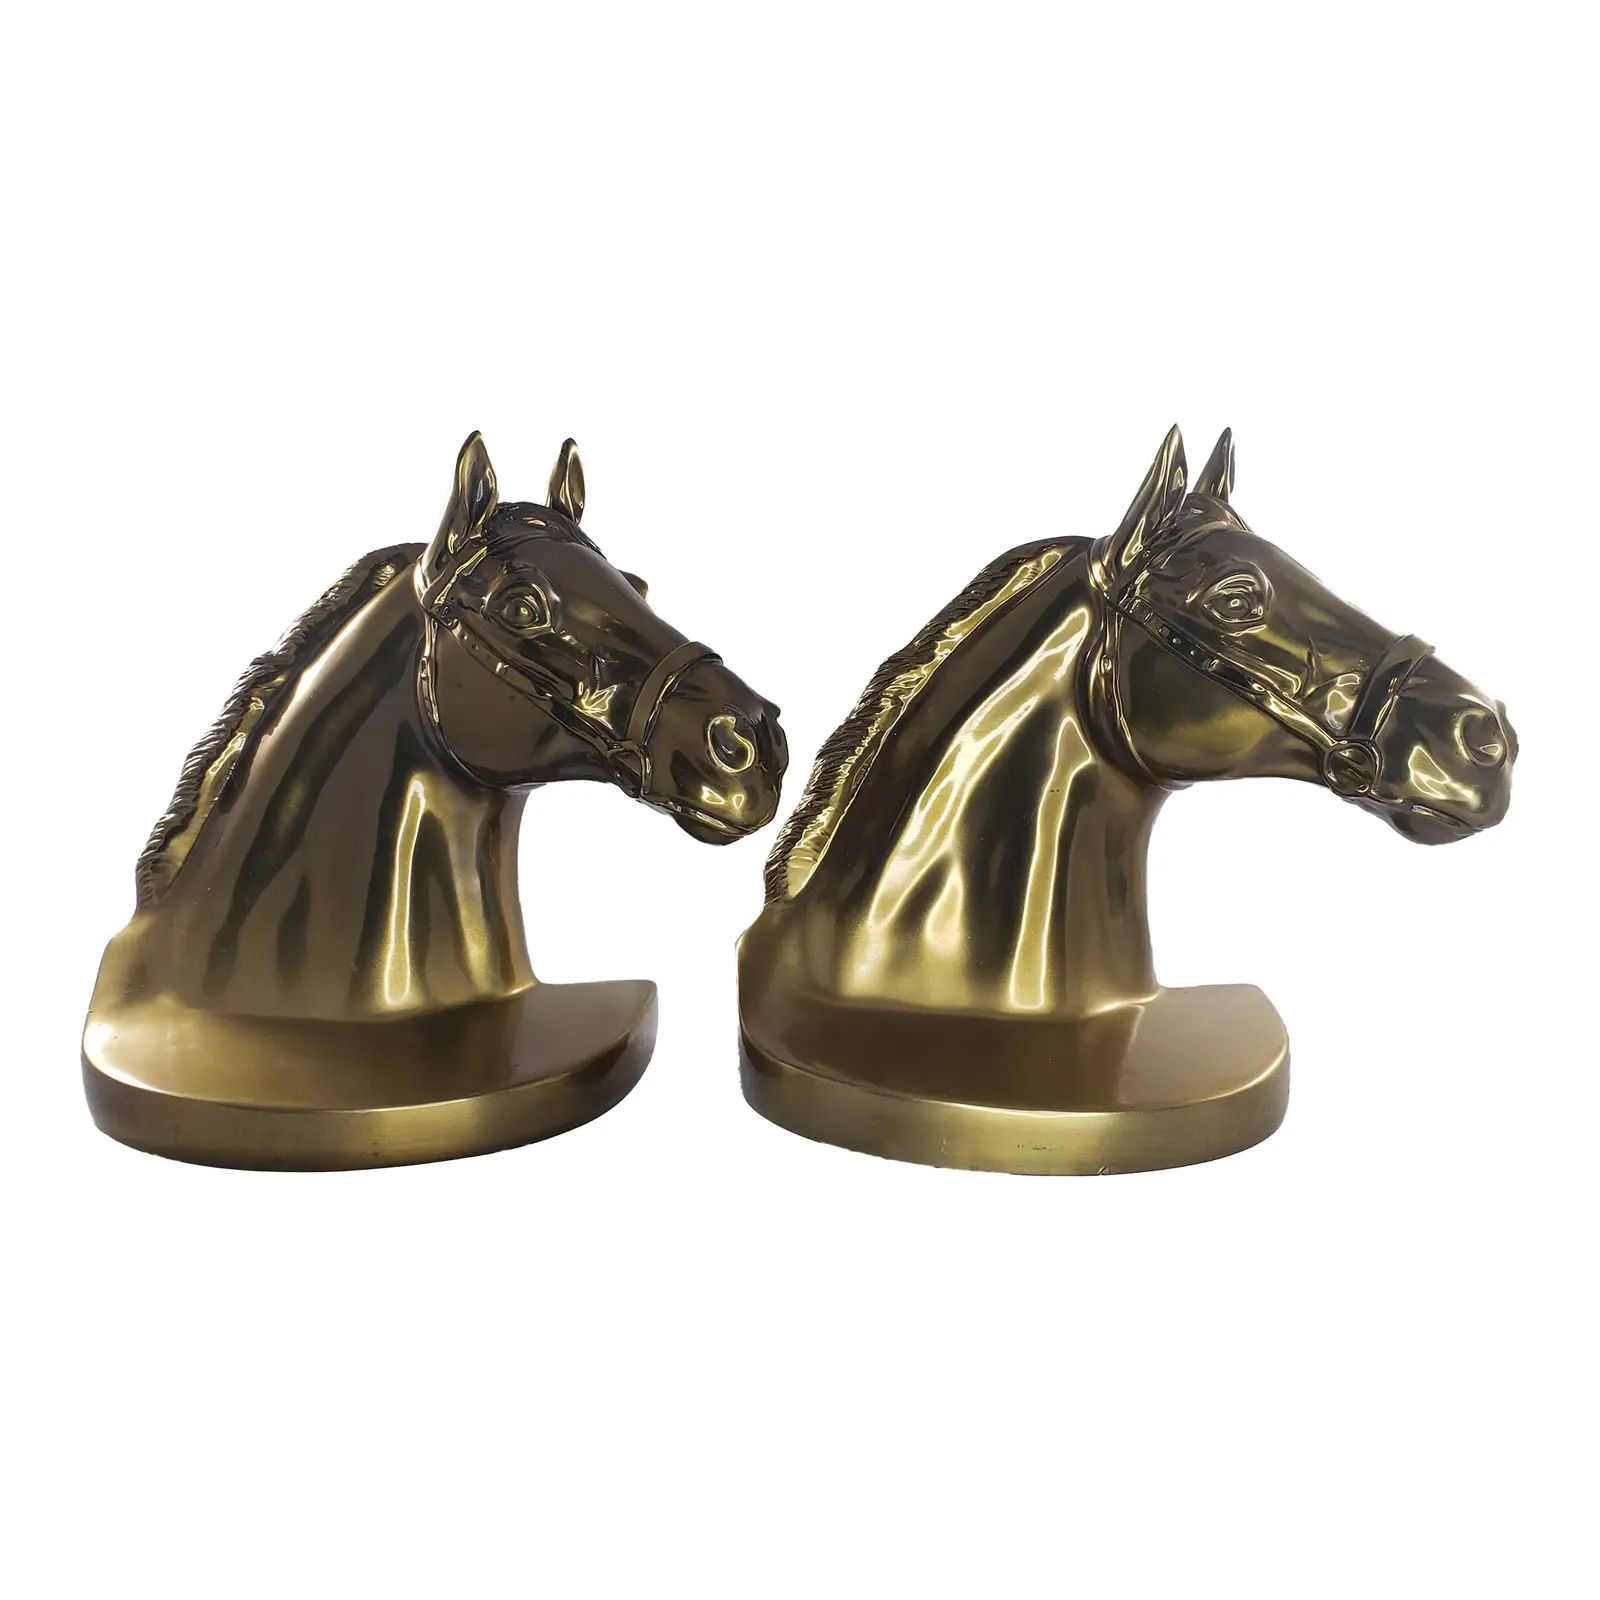 Vintage Pmc 89b Horse Head Brass Gold Tone Bookends- a Pair | Chairish